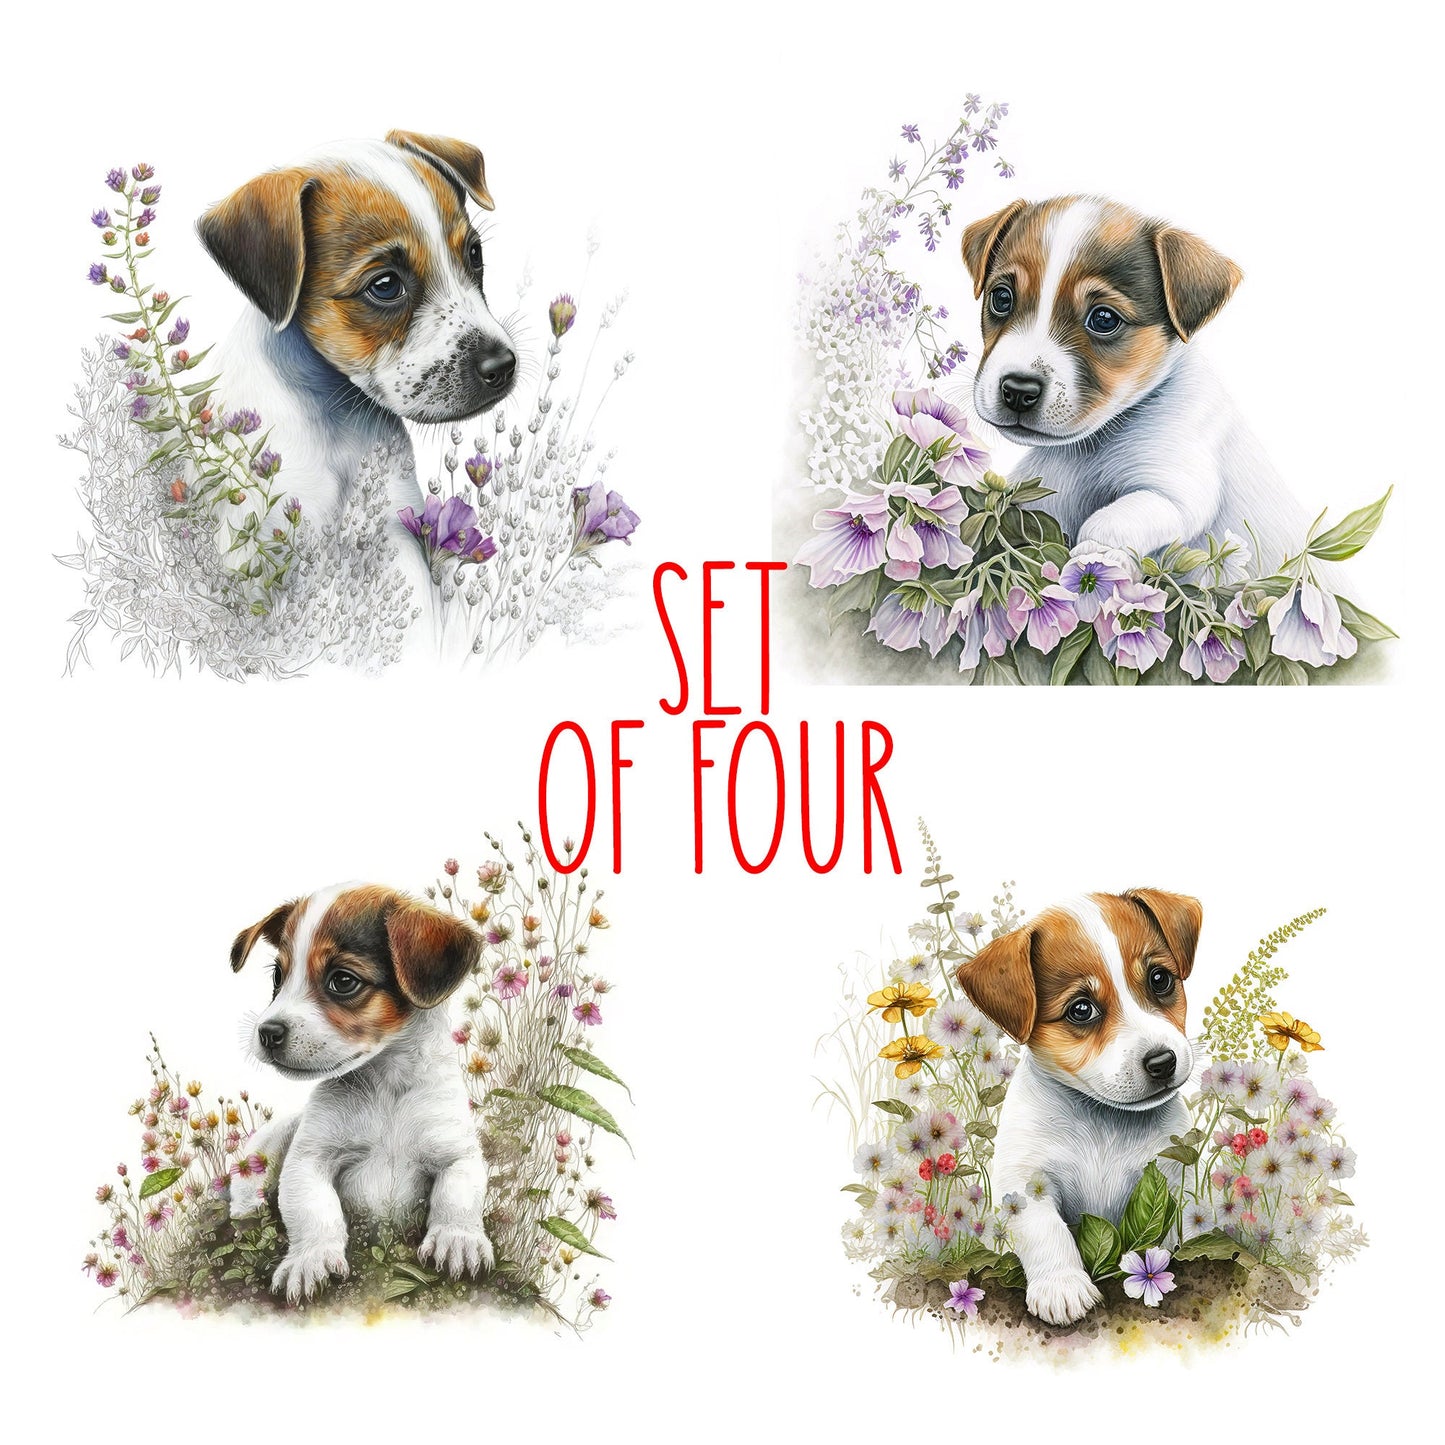 Cute Jack Russell Puppy Art Decorative Ceramic Tile Set with Optional Easel Back - Available in 4 sizes - Set of 4